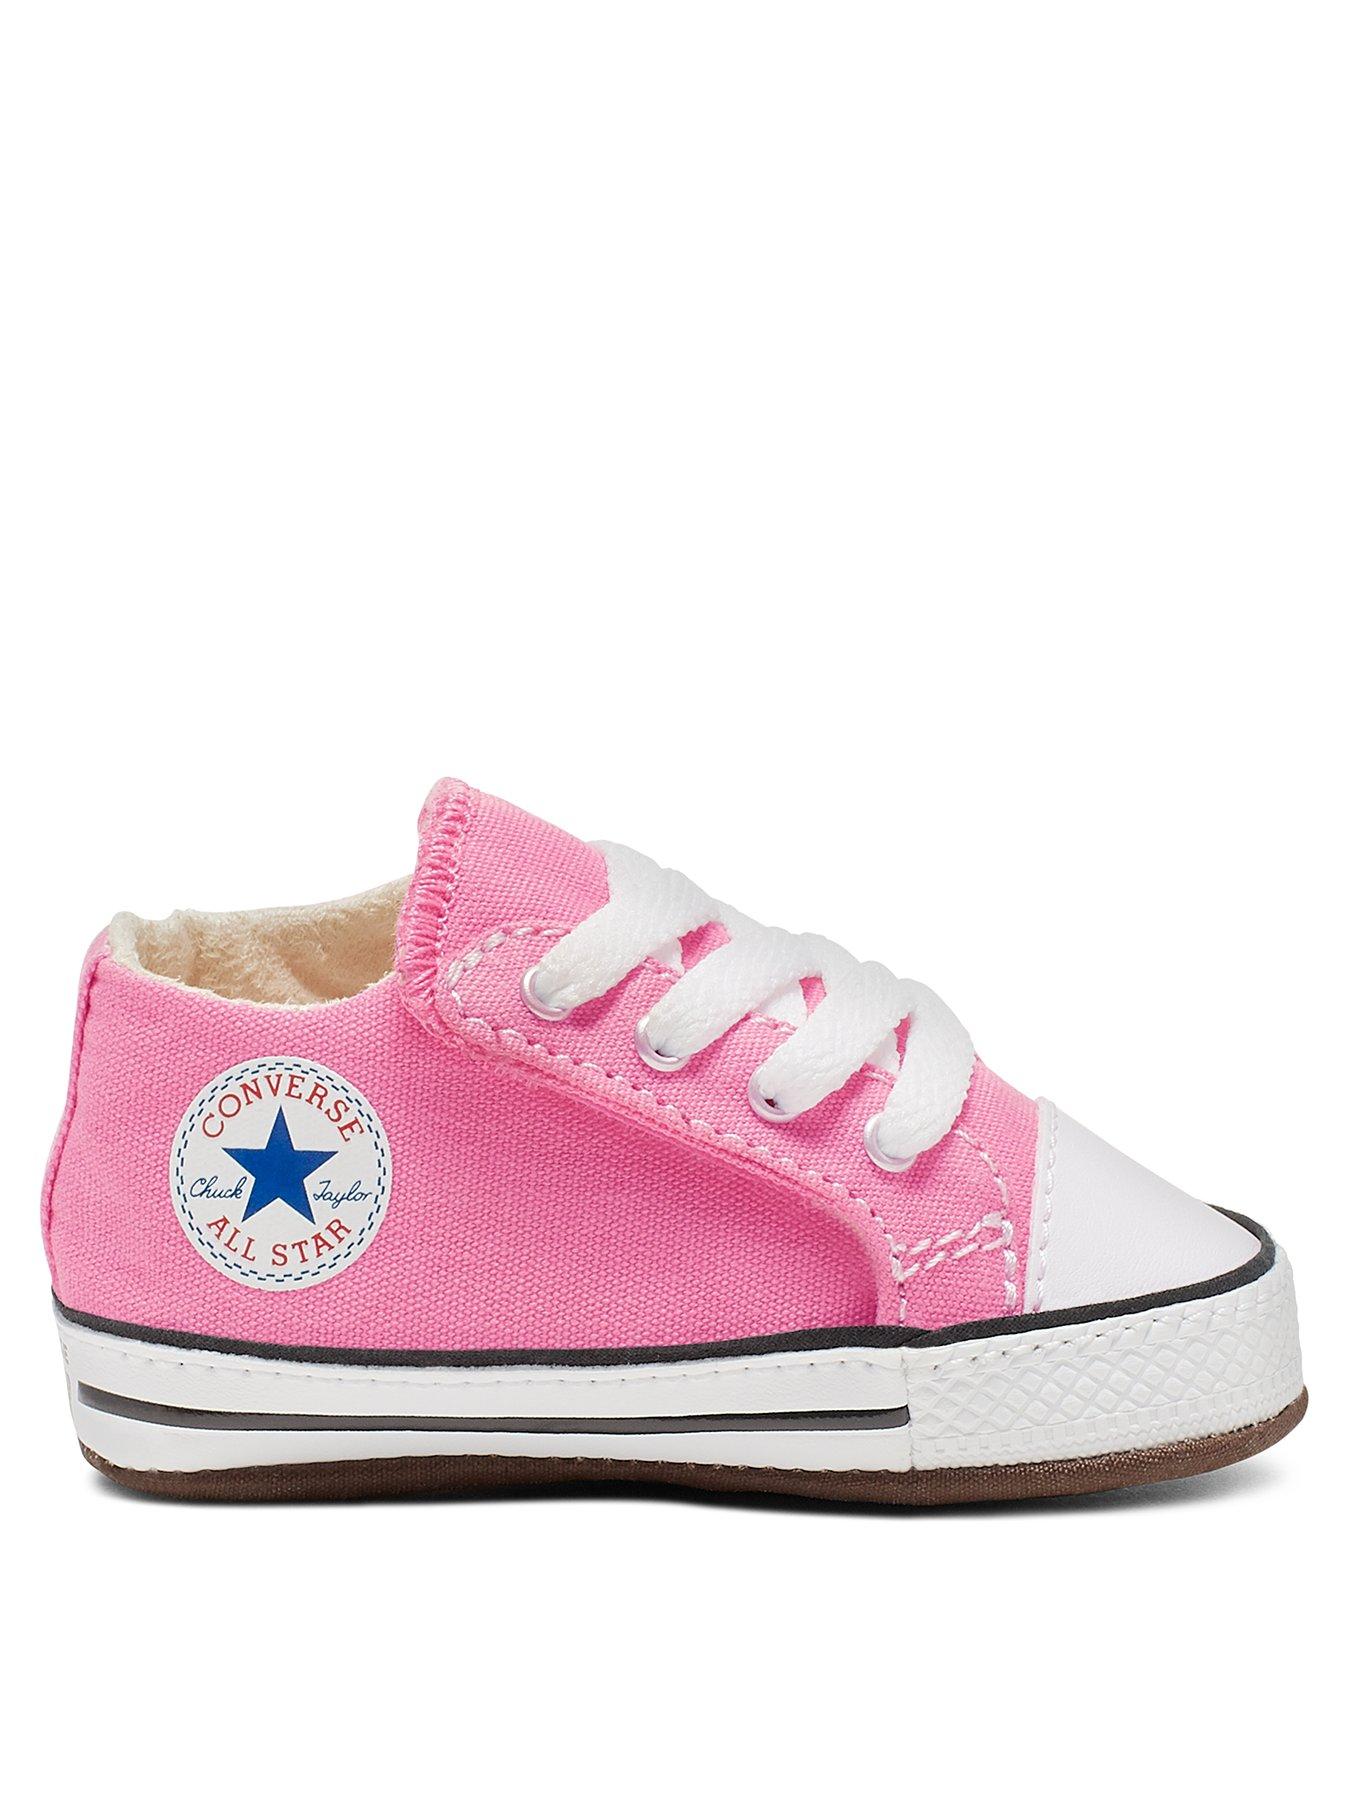 what size converse for 18 month old